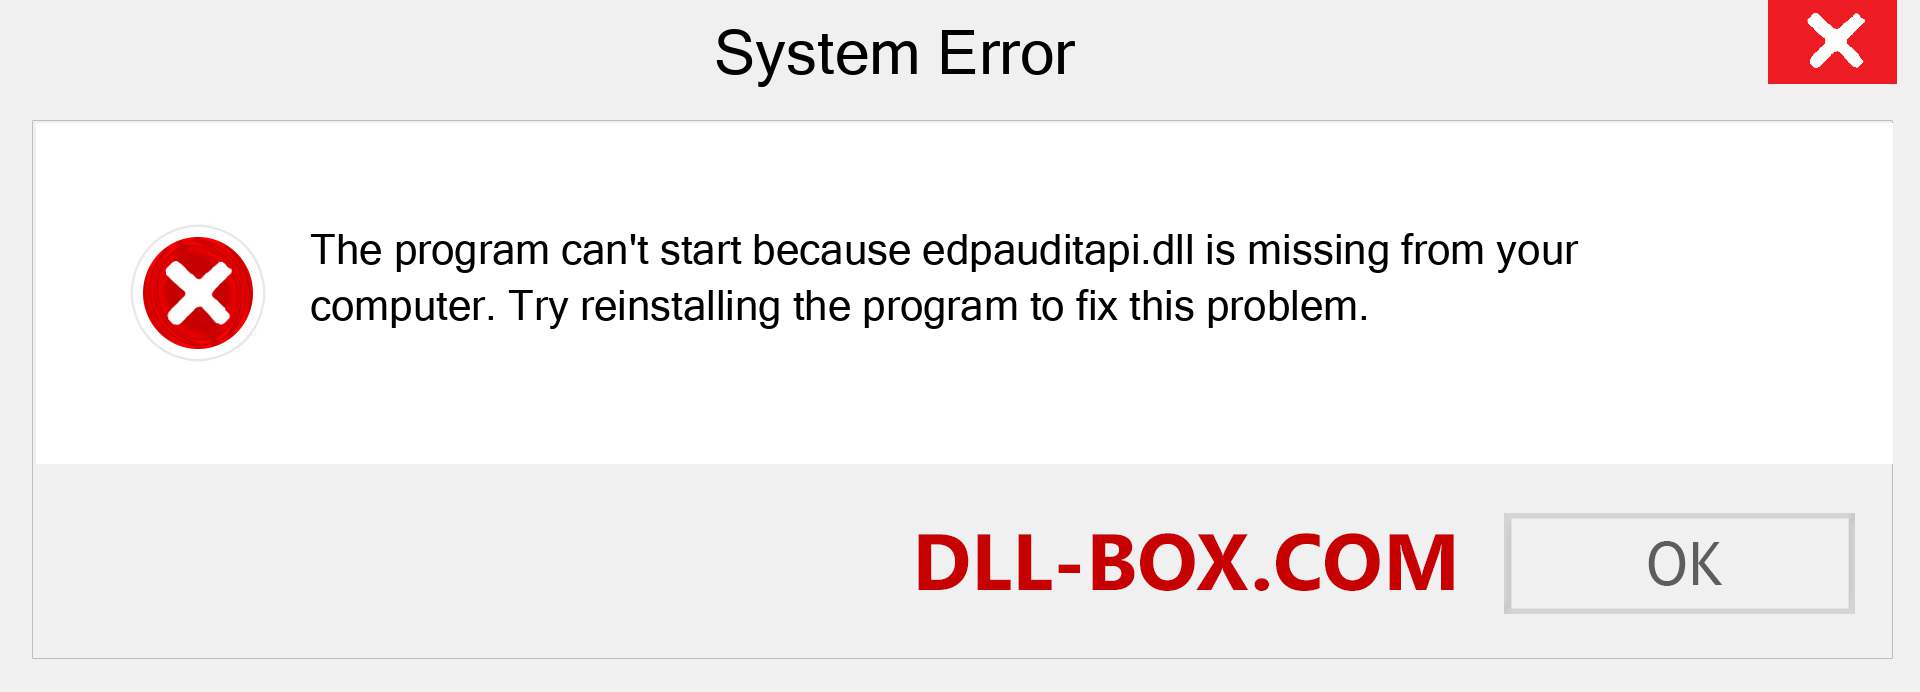  edpauditapi.dll file is missing?. Download for Windows 7, 8, 10 - Fix  edpauditapi dll Missing Error on Windows, photos, images